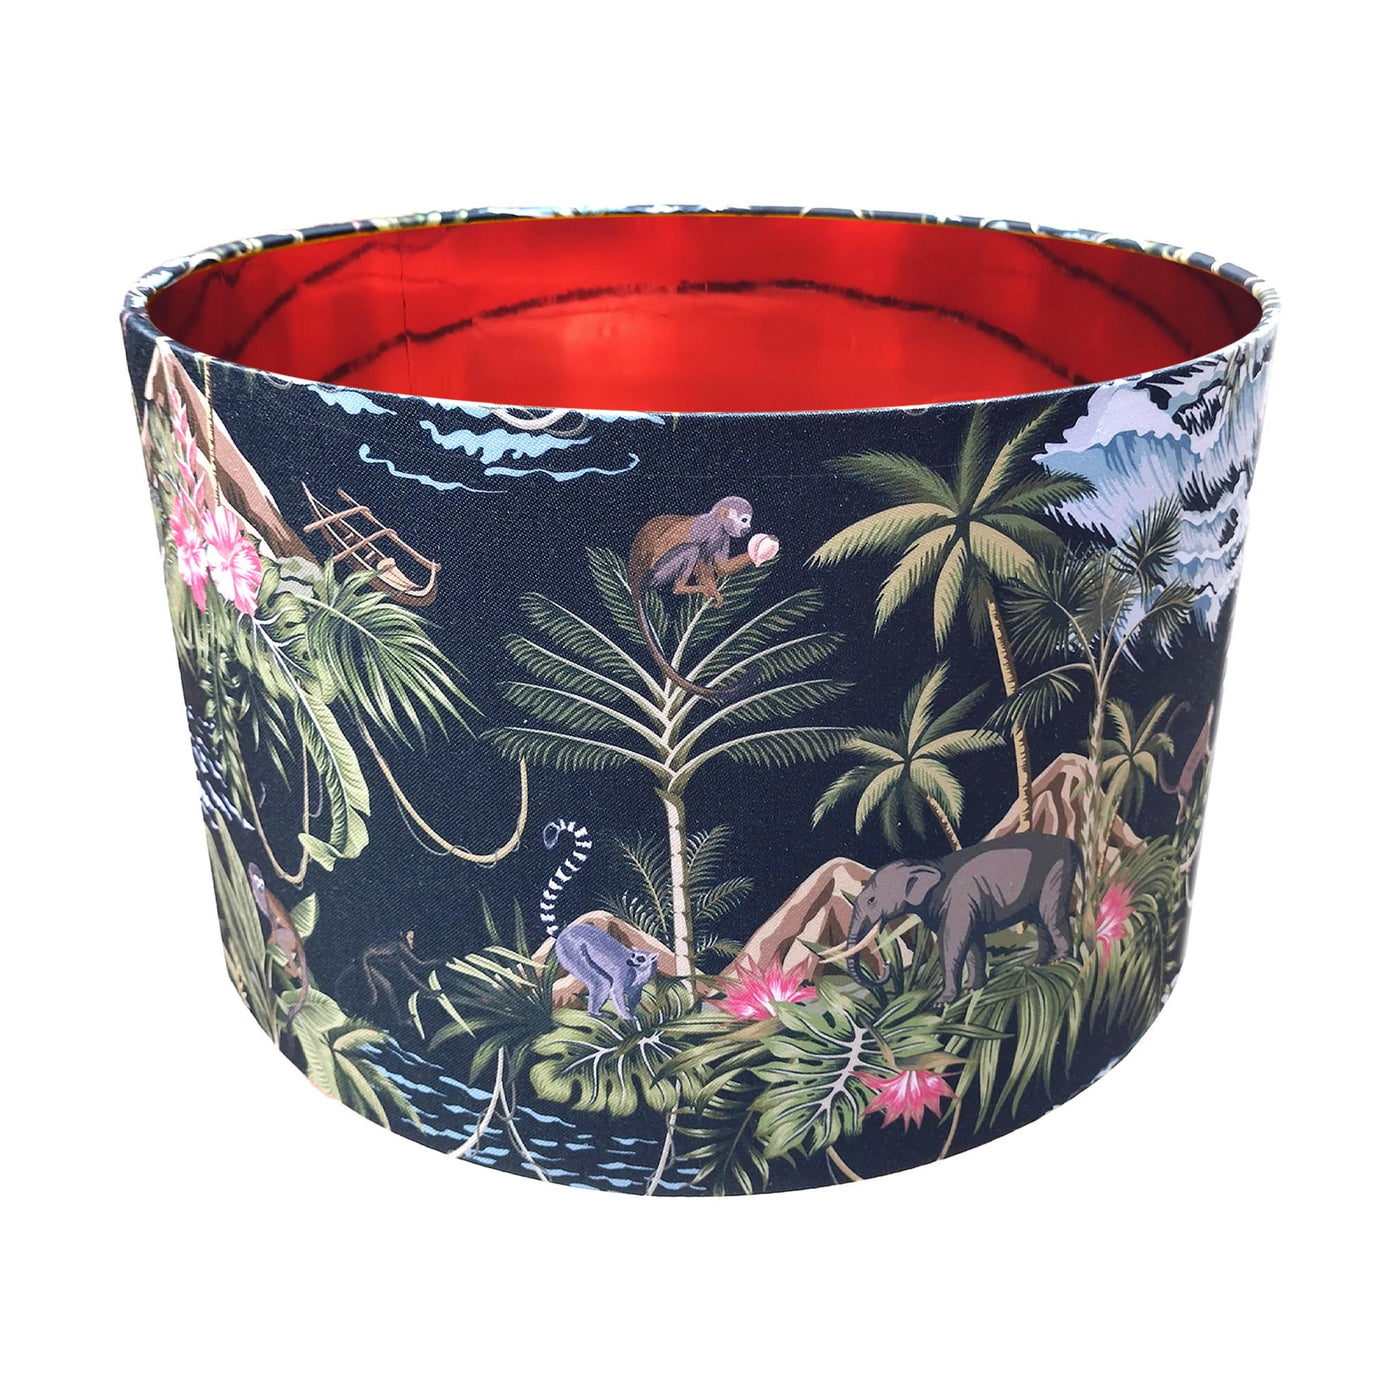 Black Lemur Island Cotton Lampshade with Mirror Copper Lining